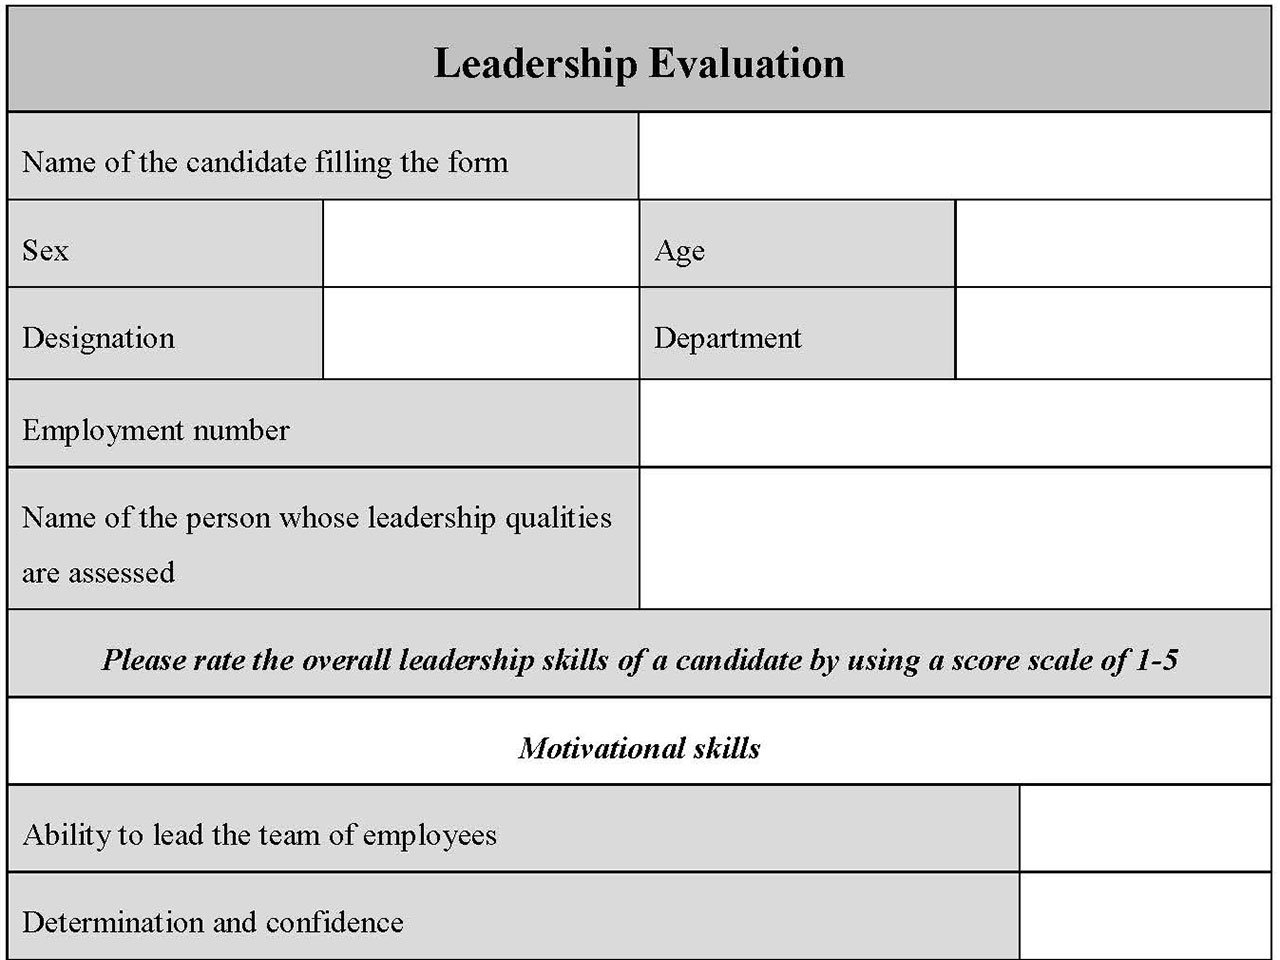 joint assignment leadership evaluation